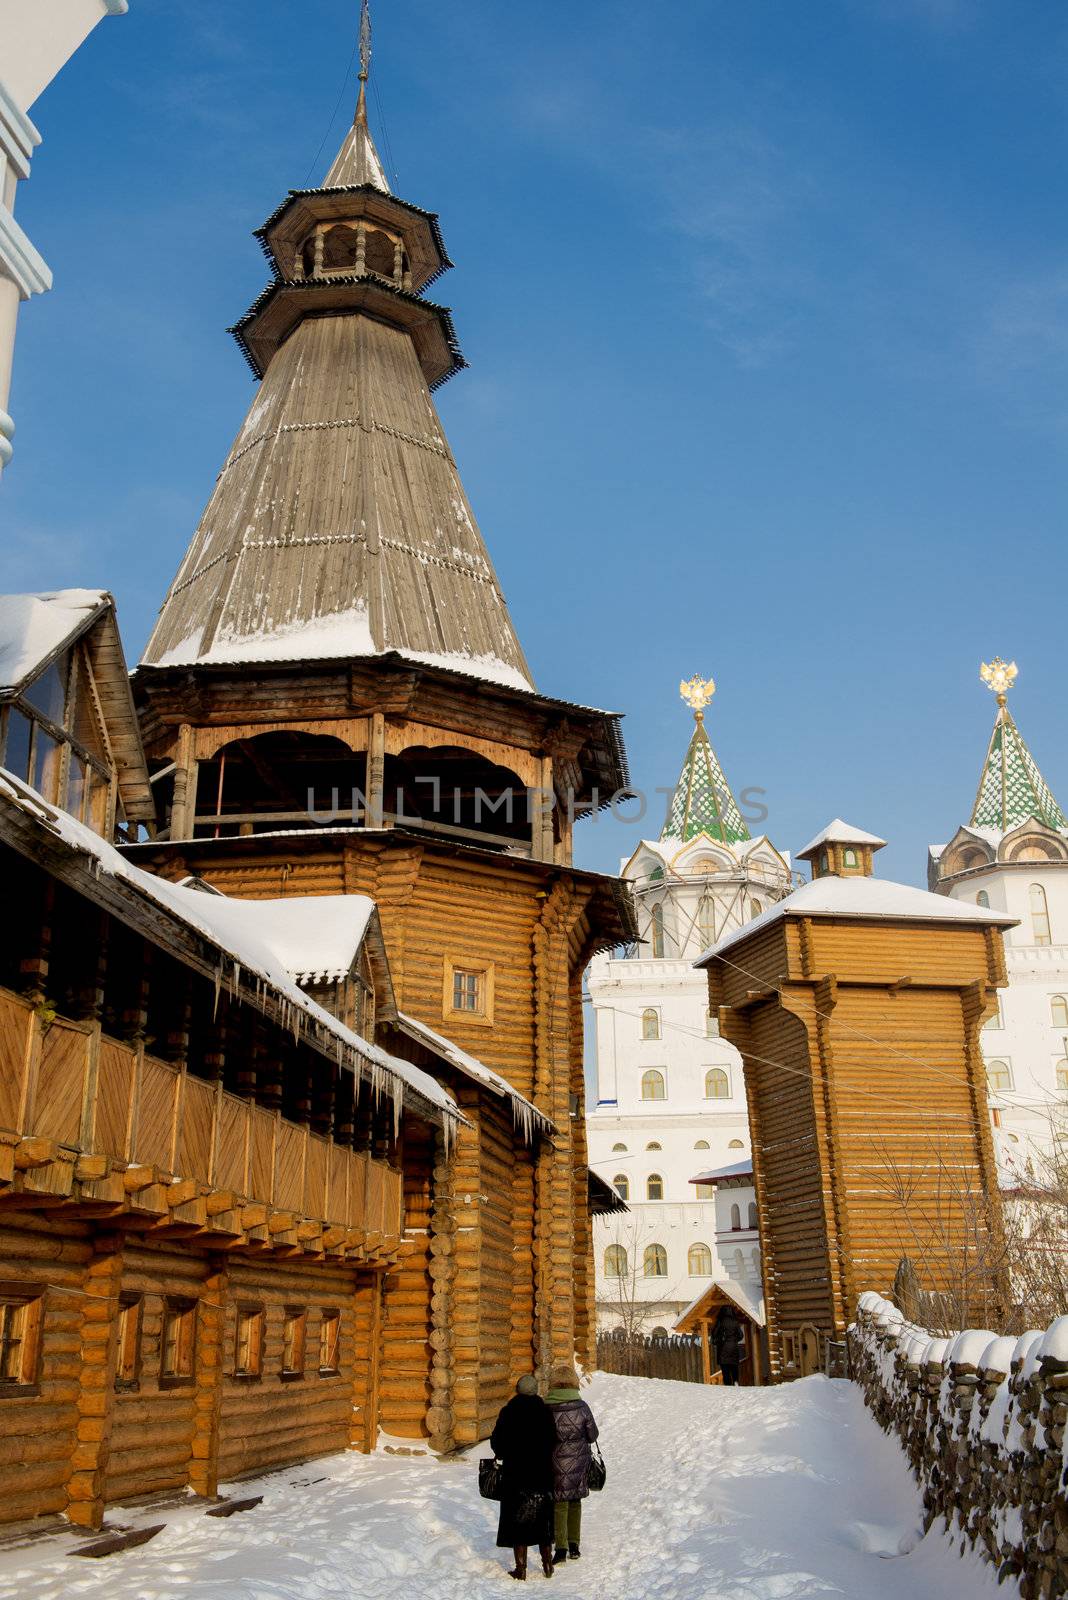 Moscow, Russia - January 2013. The reconstructed complex Izmailovskiy Kremlin is a sample of the Russian architecture.